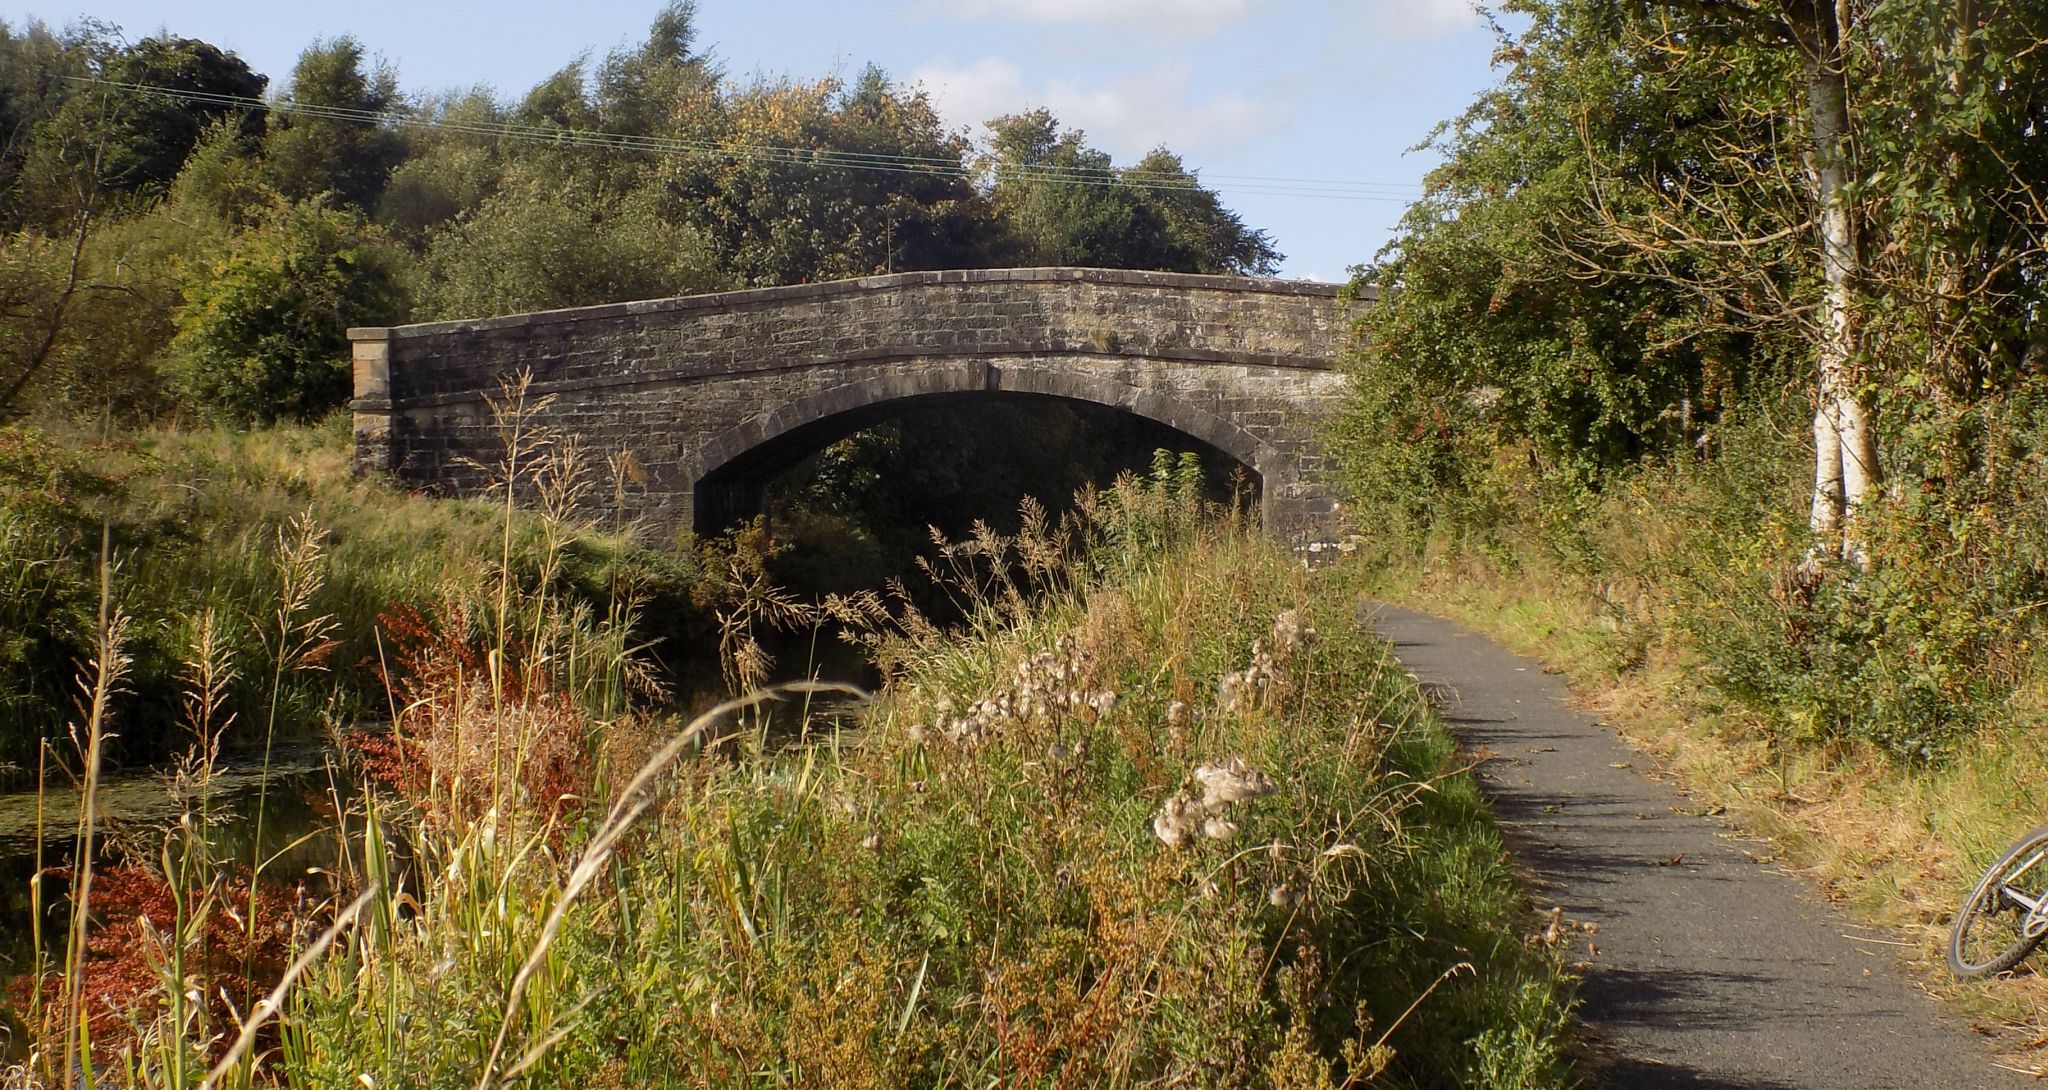 Bridge over the Union Canal between Falkirk and Linlithgow